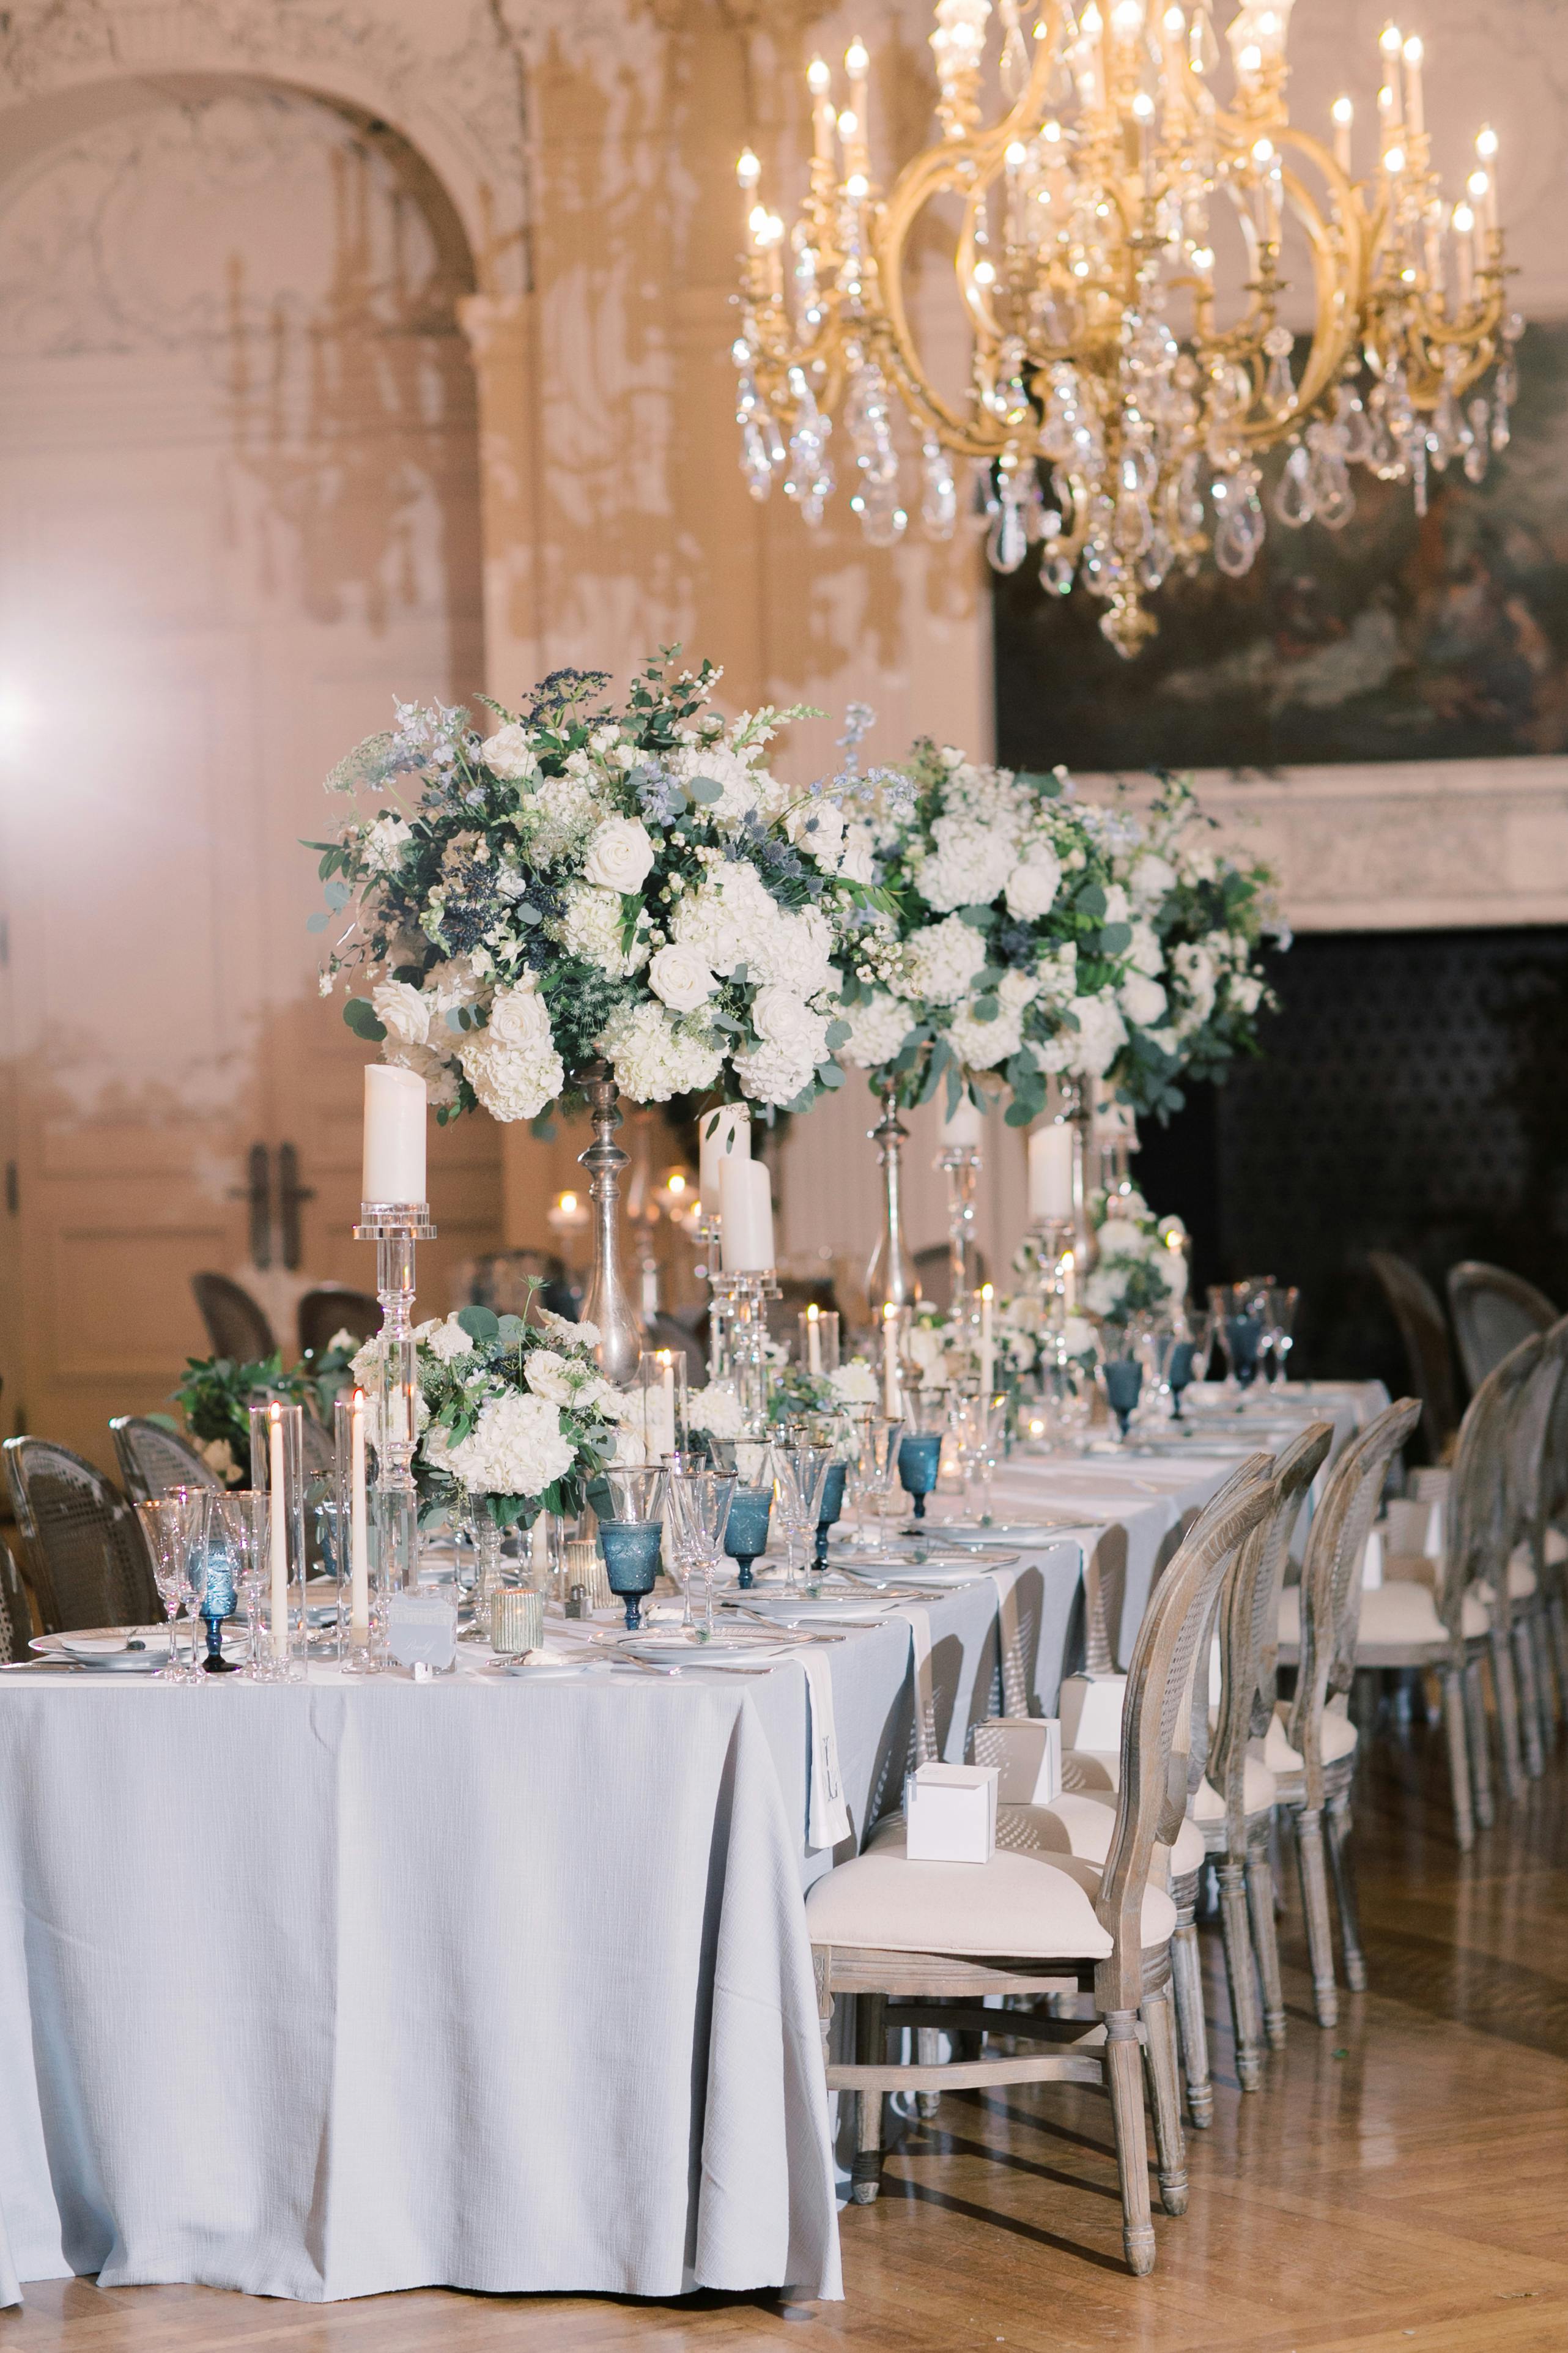 Elegant Ballroom Wedding at the Newport Mansion in Newport, RI with Soft Blue and White Spring Wedding Colors